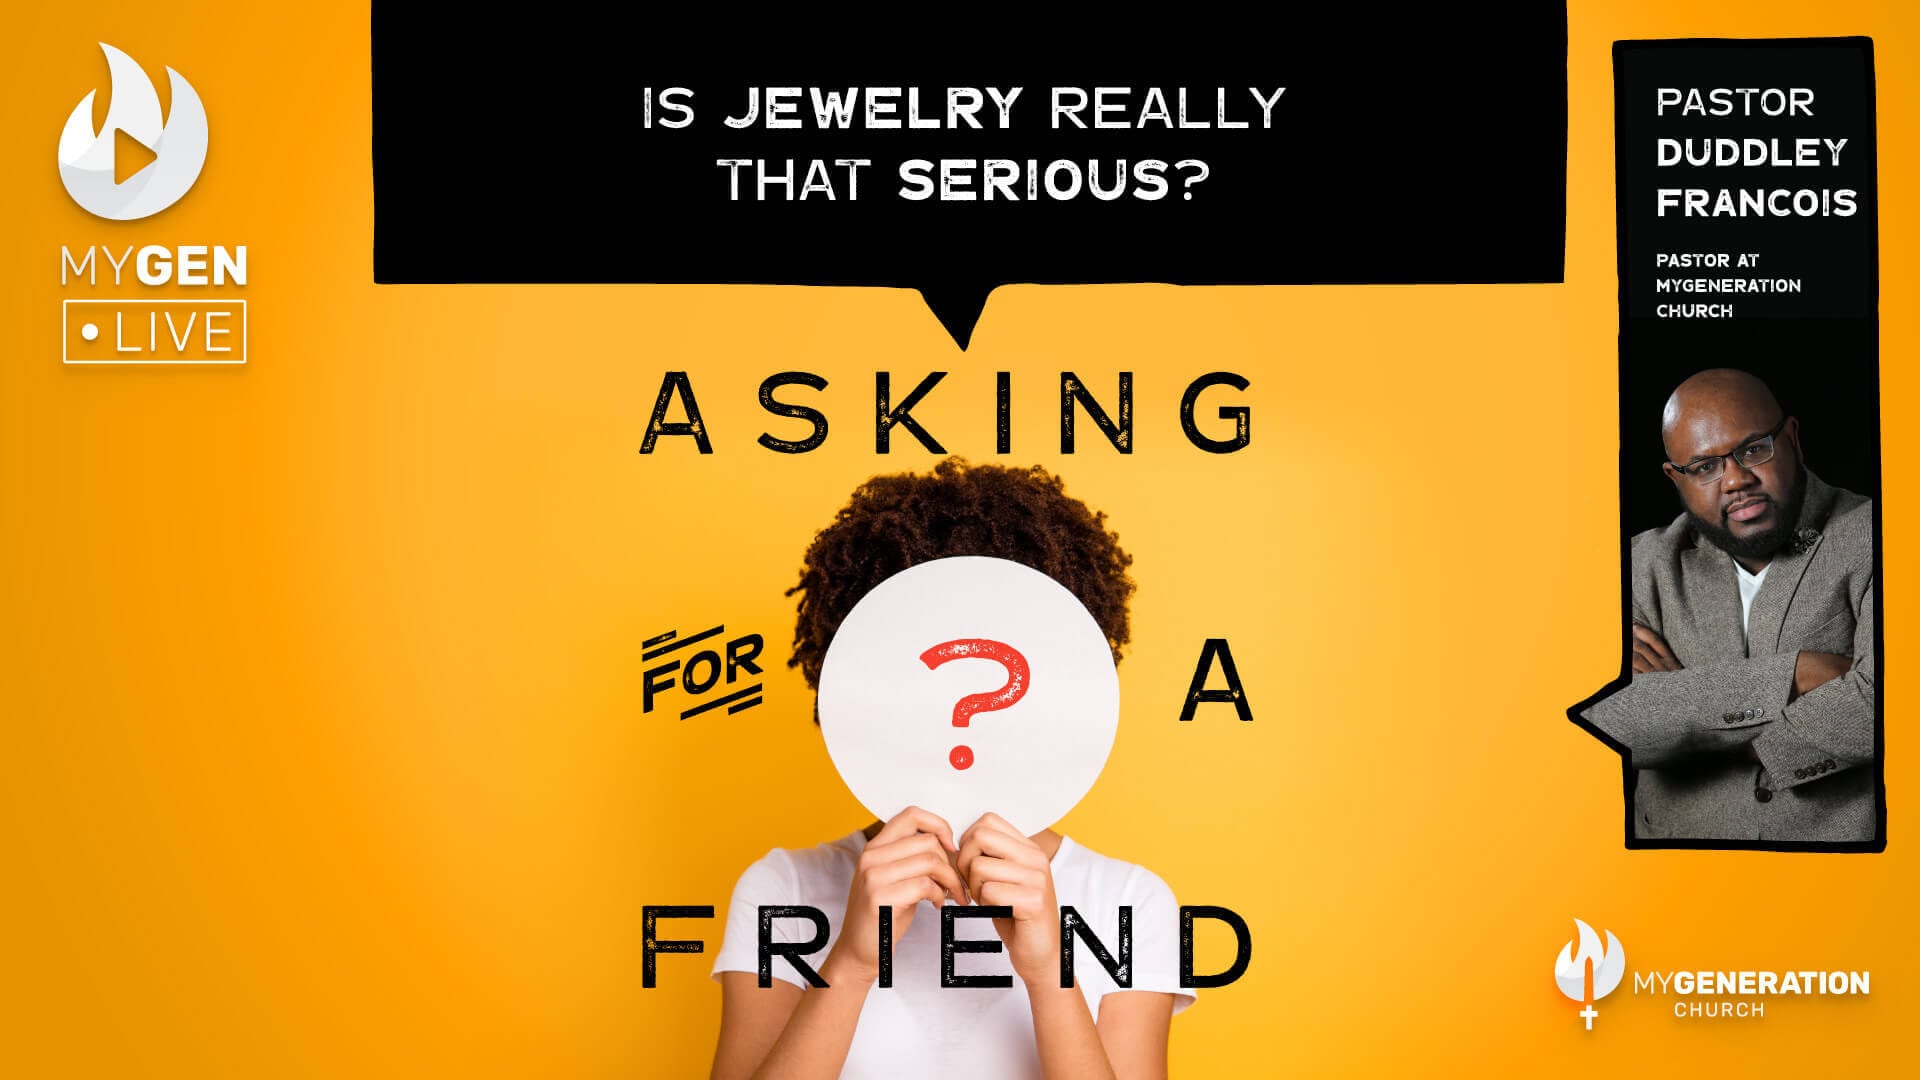 MyGen LIVE: Is Jewelry Really That Serious? Asking For A Friend.